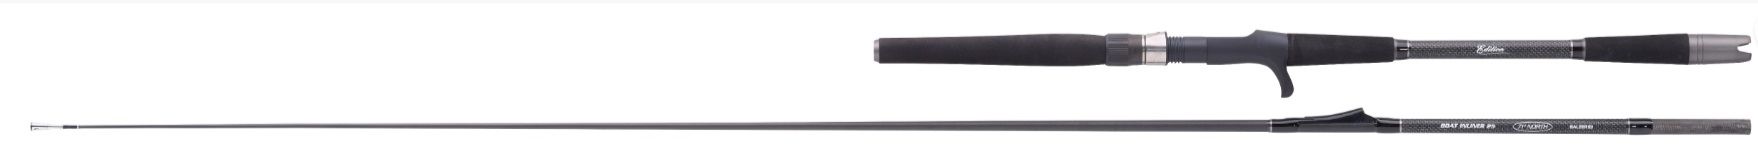 Balzer 71 Degrees North Boat Inliner 25lbs Rod - 2.10m 100-300gr